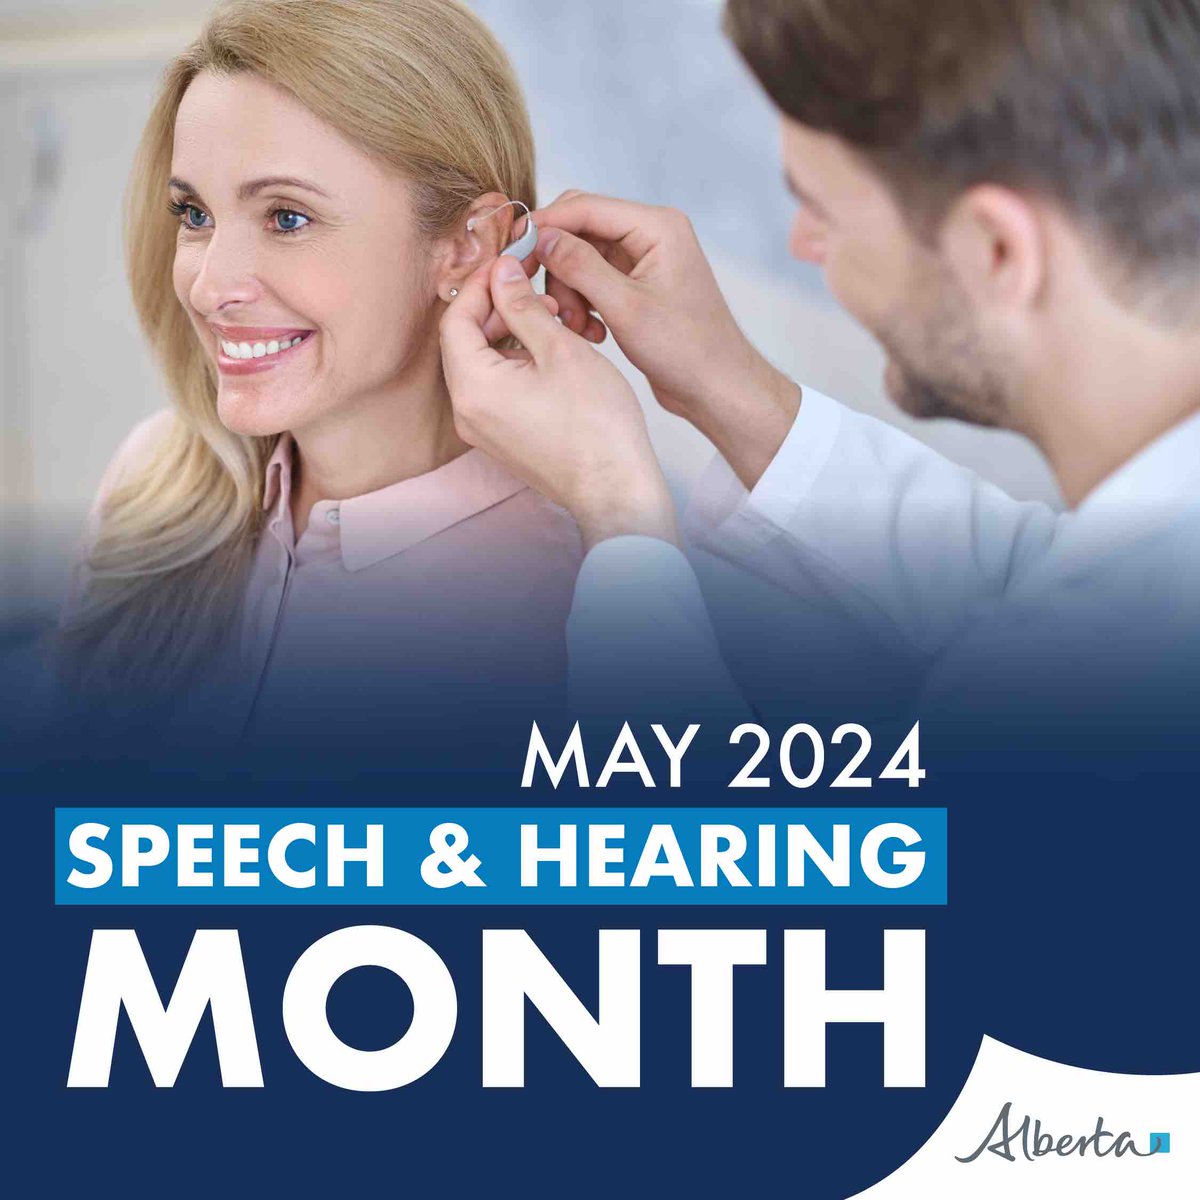 May is Speech & Hearing Month! This month we recognize the dedication and commitment speech-language pathologists and audiologists have in helping individuals with speech, language, hearing, balance, and swallowing disorders.